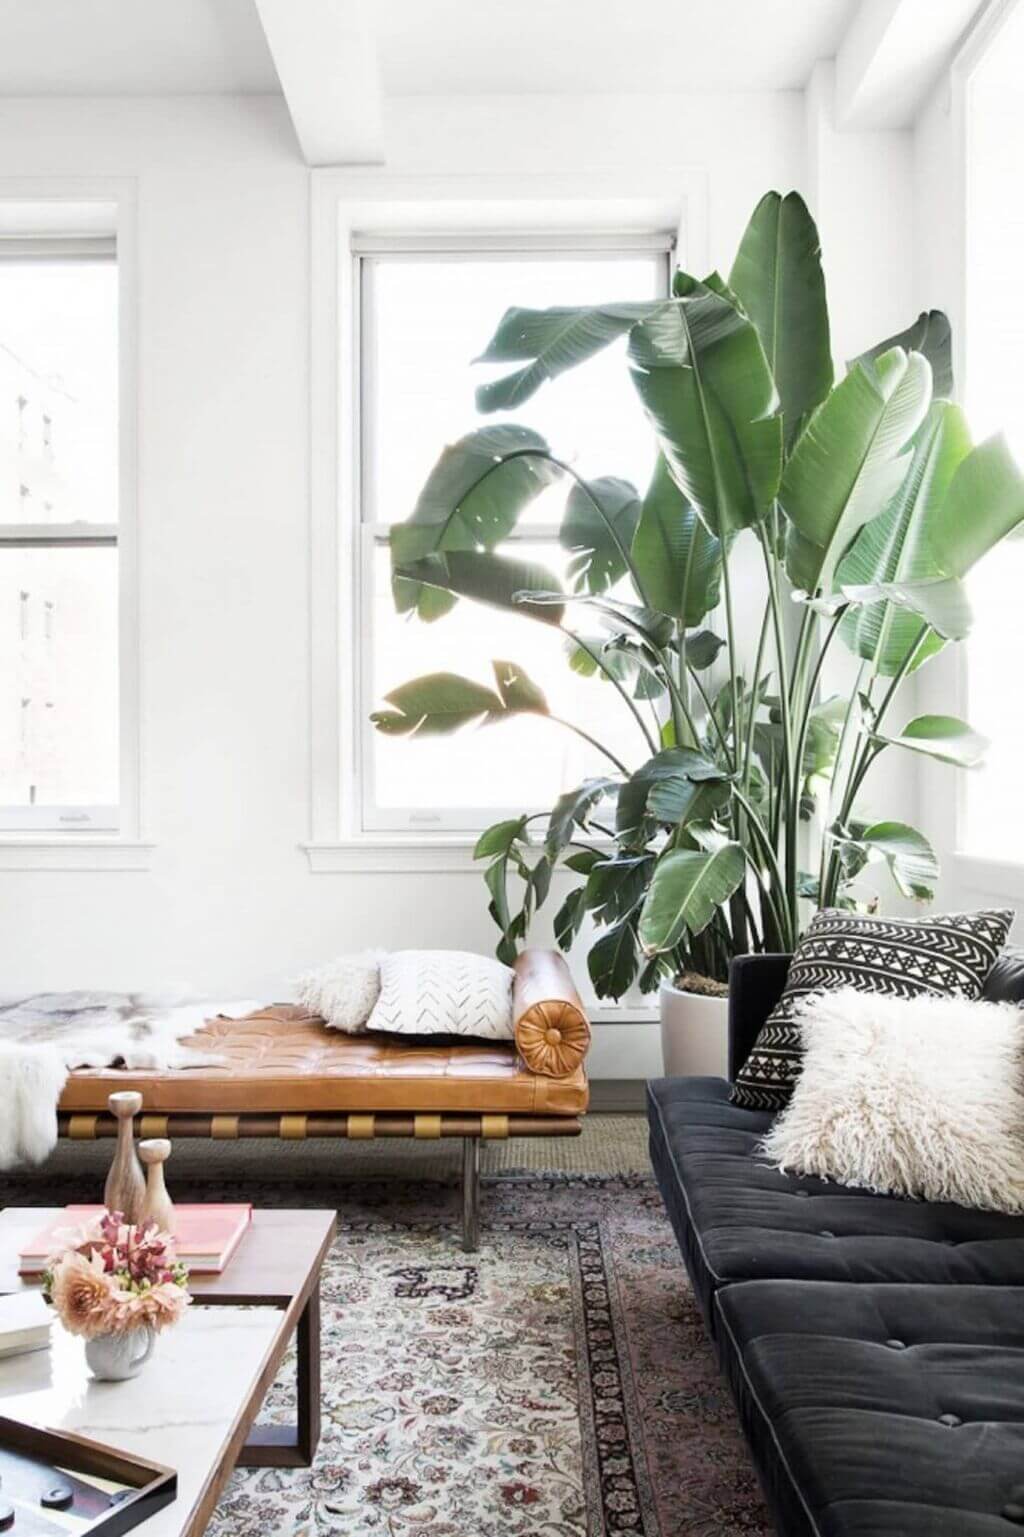 A living room filled with furniture and a large plant
